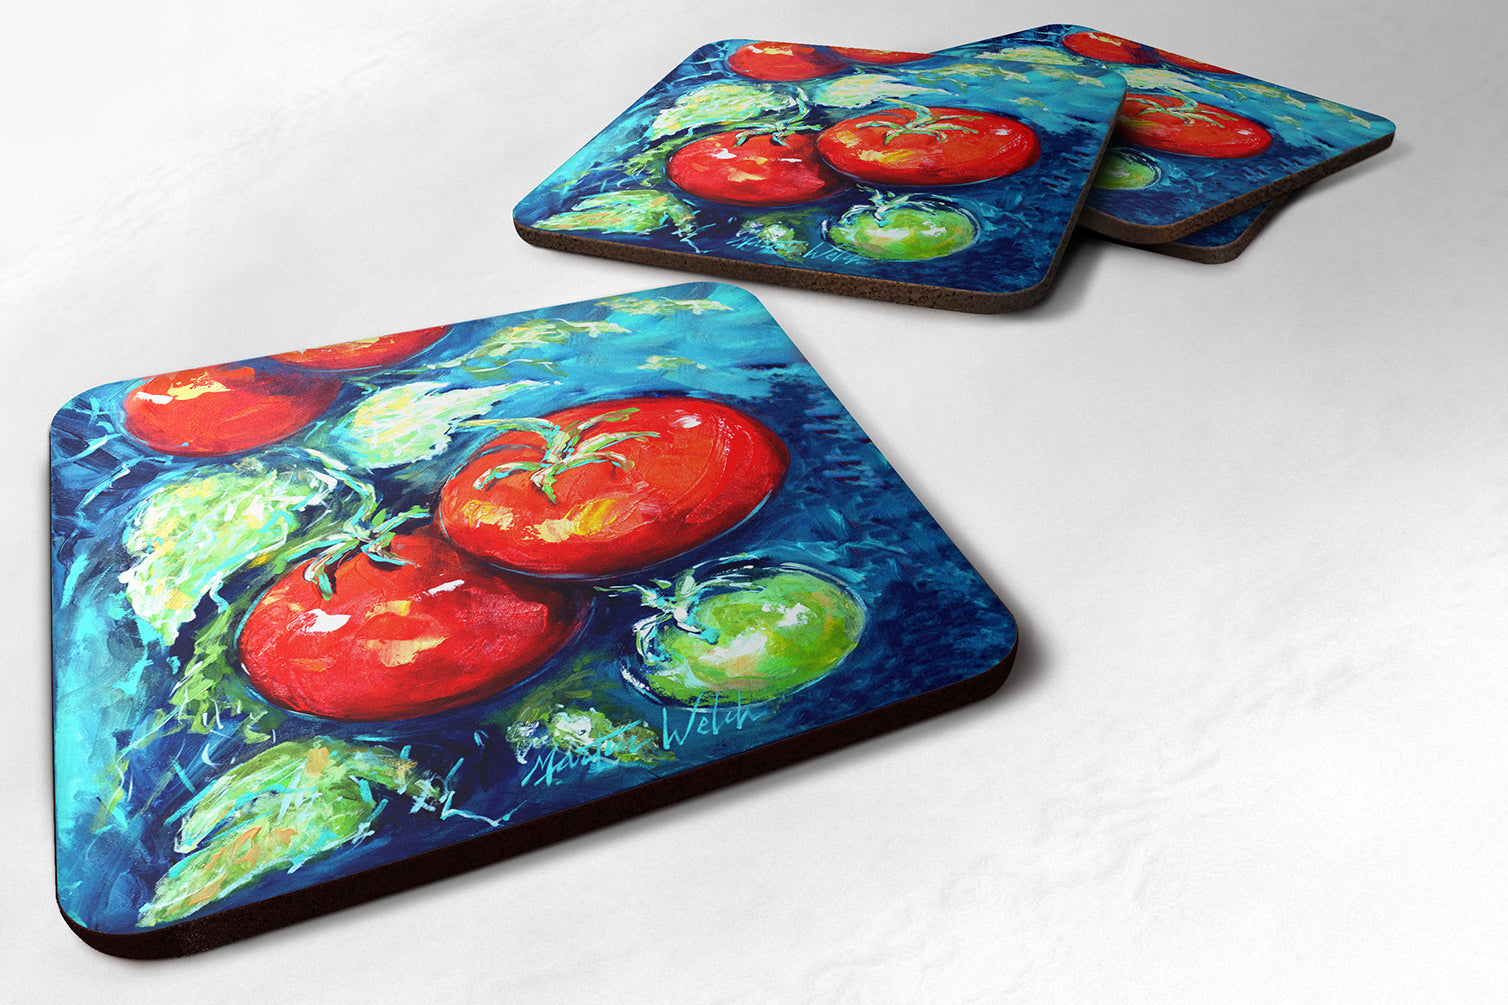 Buy this Vegetables - Tomatoes on the vine Foam Coaster Set of 4